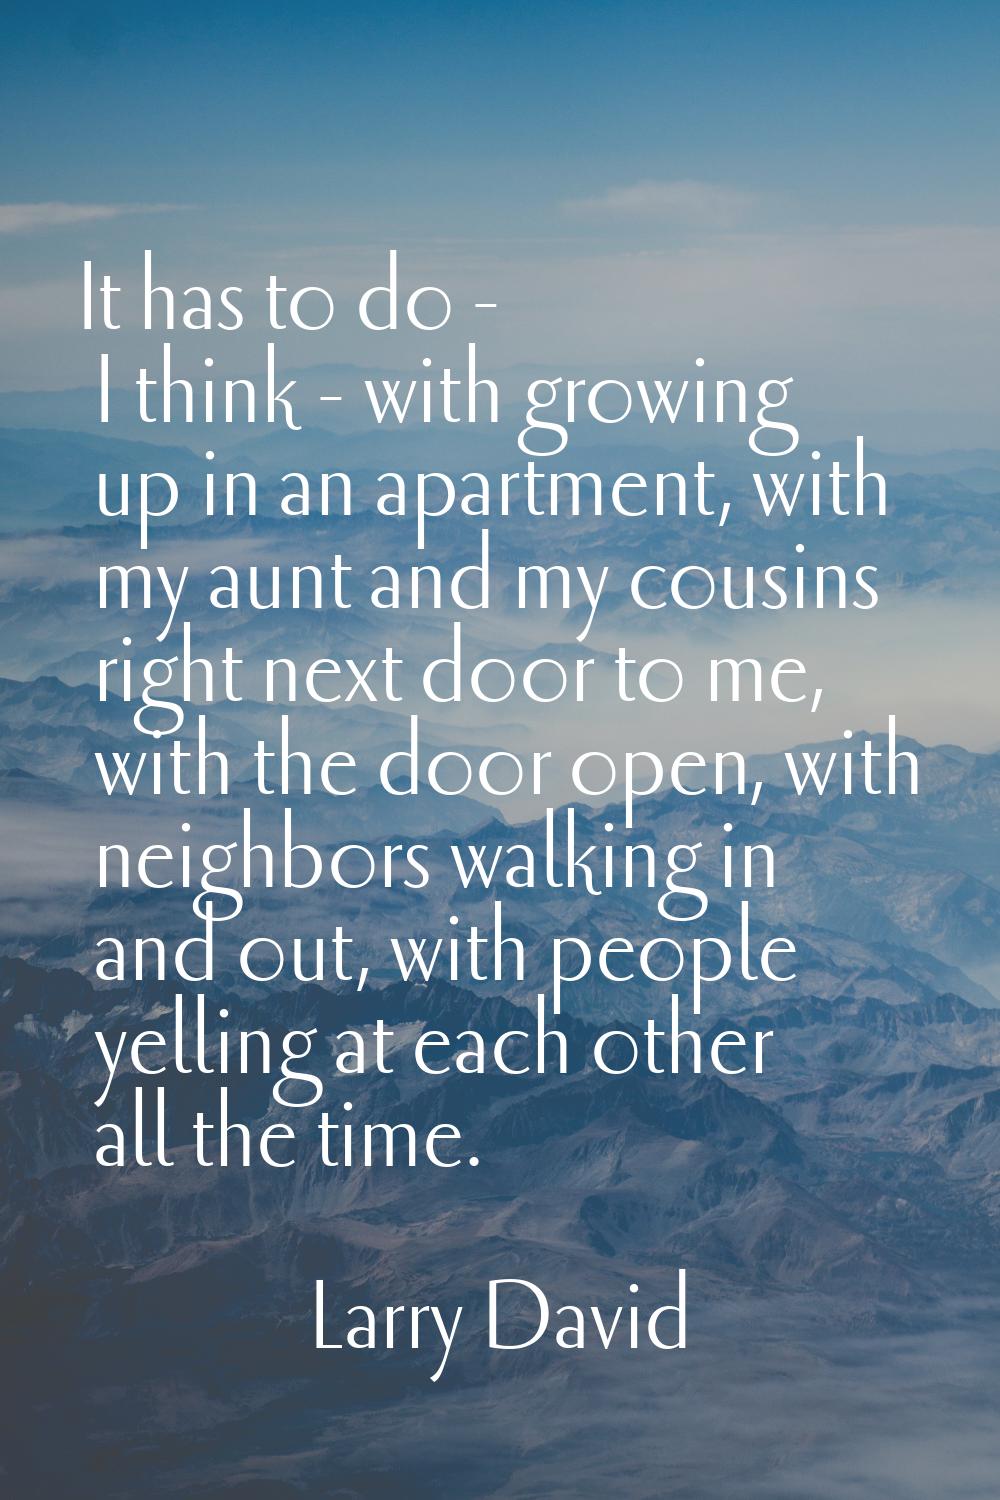 It has to do - I think - with growing up in an apartment, with my aunt and my cousins right next do